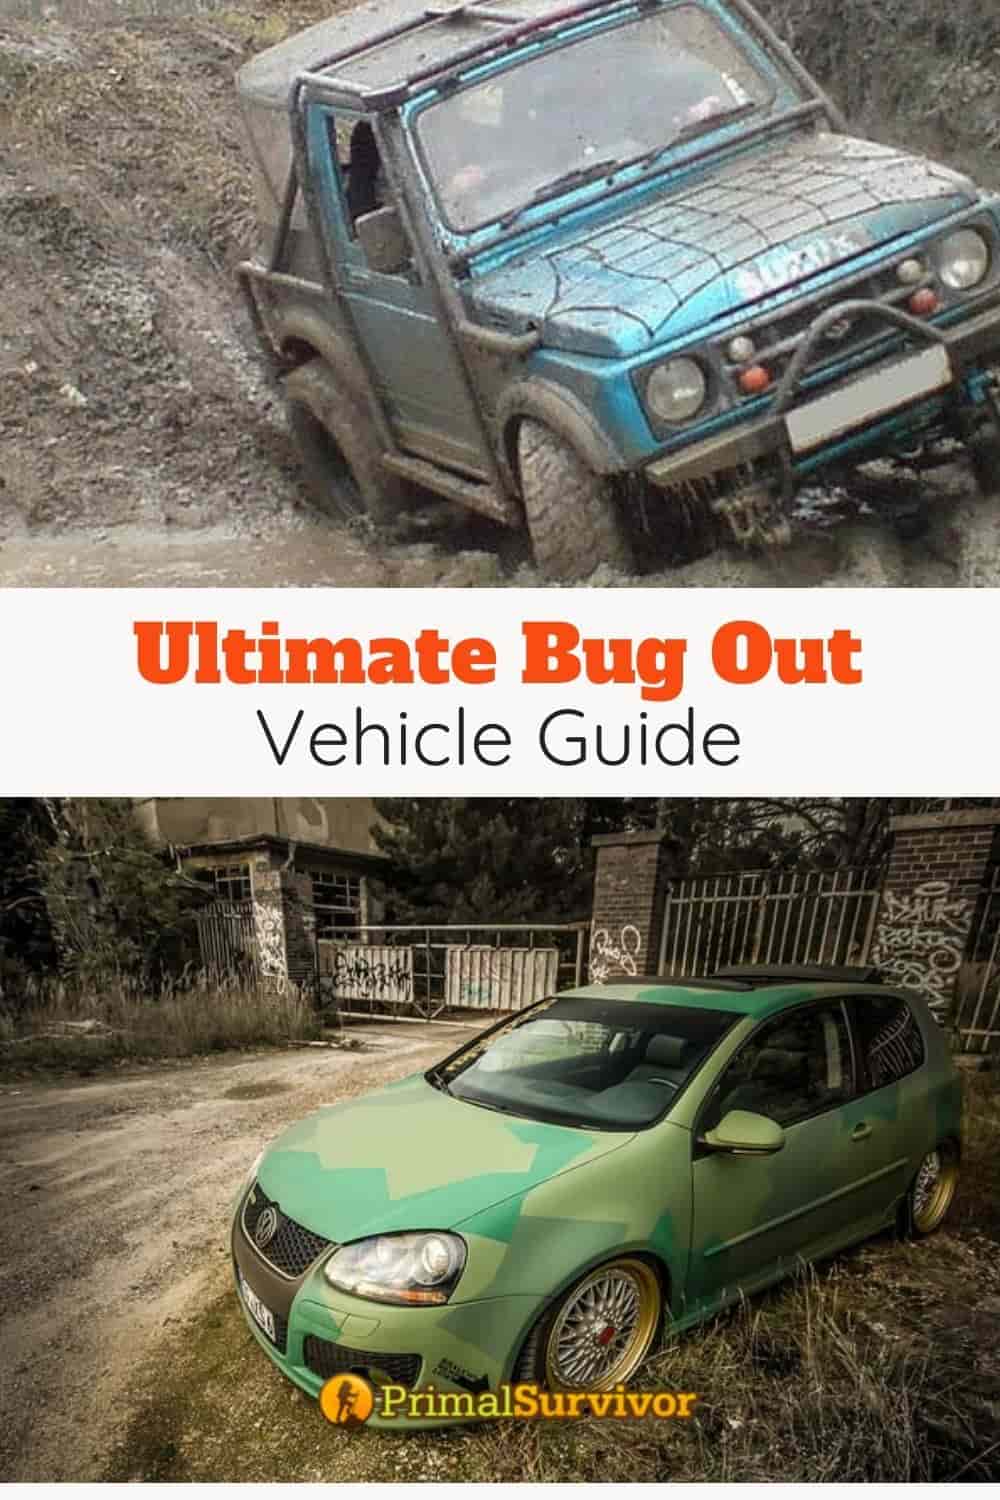 The Ultimate Bug Out Vehicle Setup, Supplies and Gear (With Checklist)